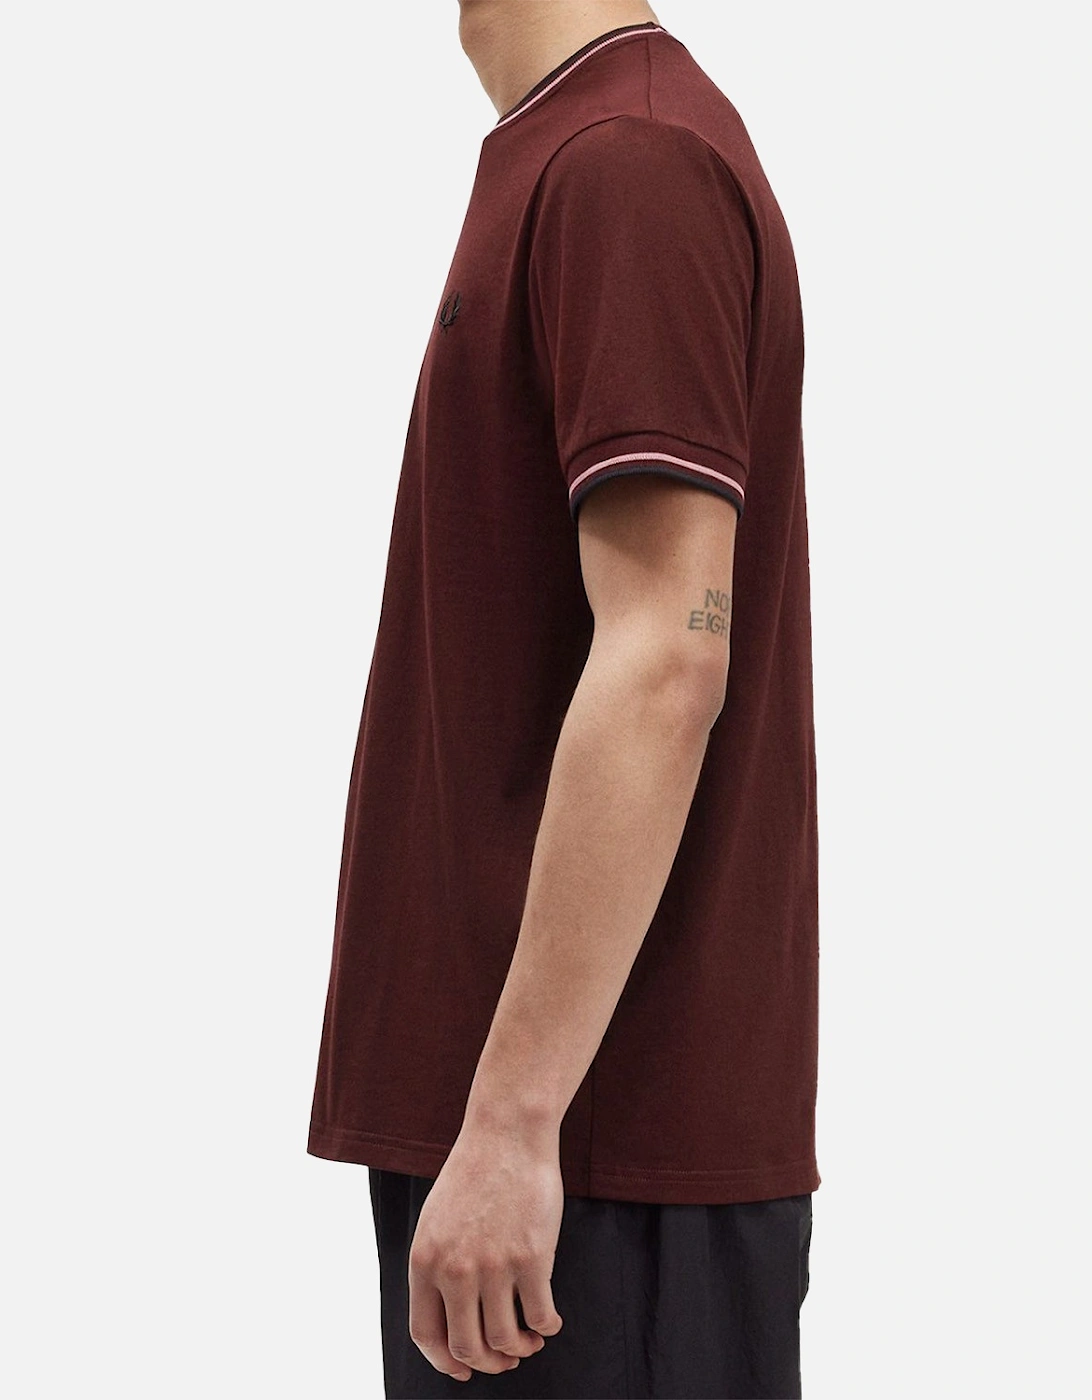 Mens Twin Tipped T-Shirt (Oxblood)